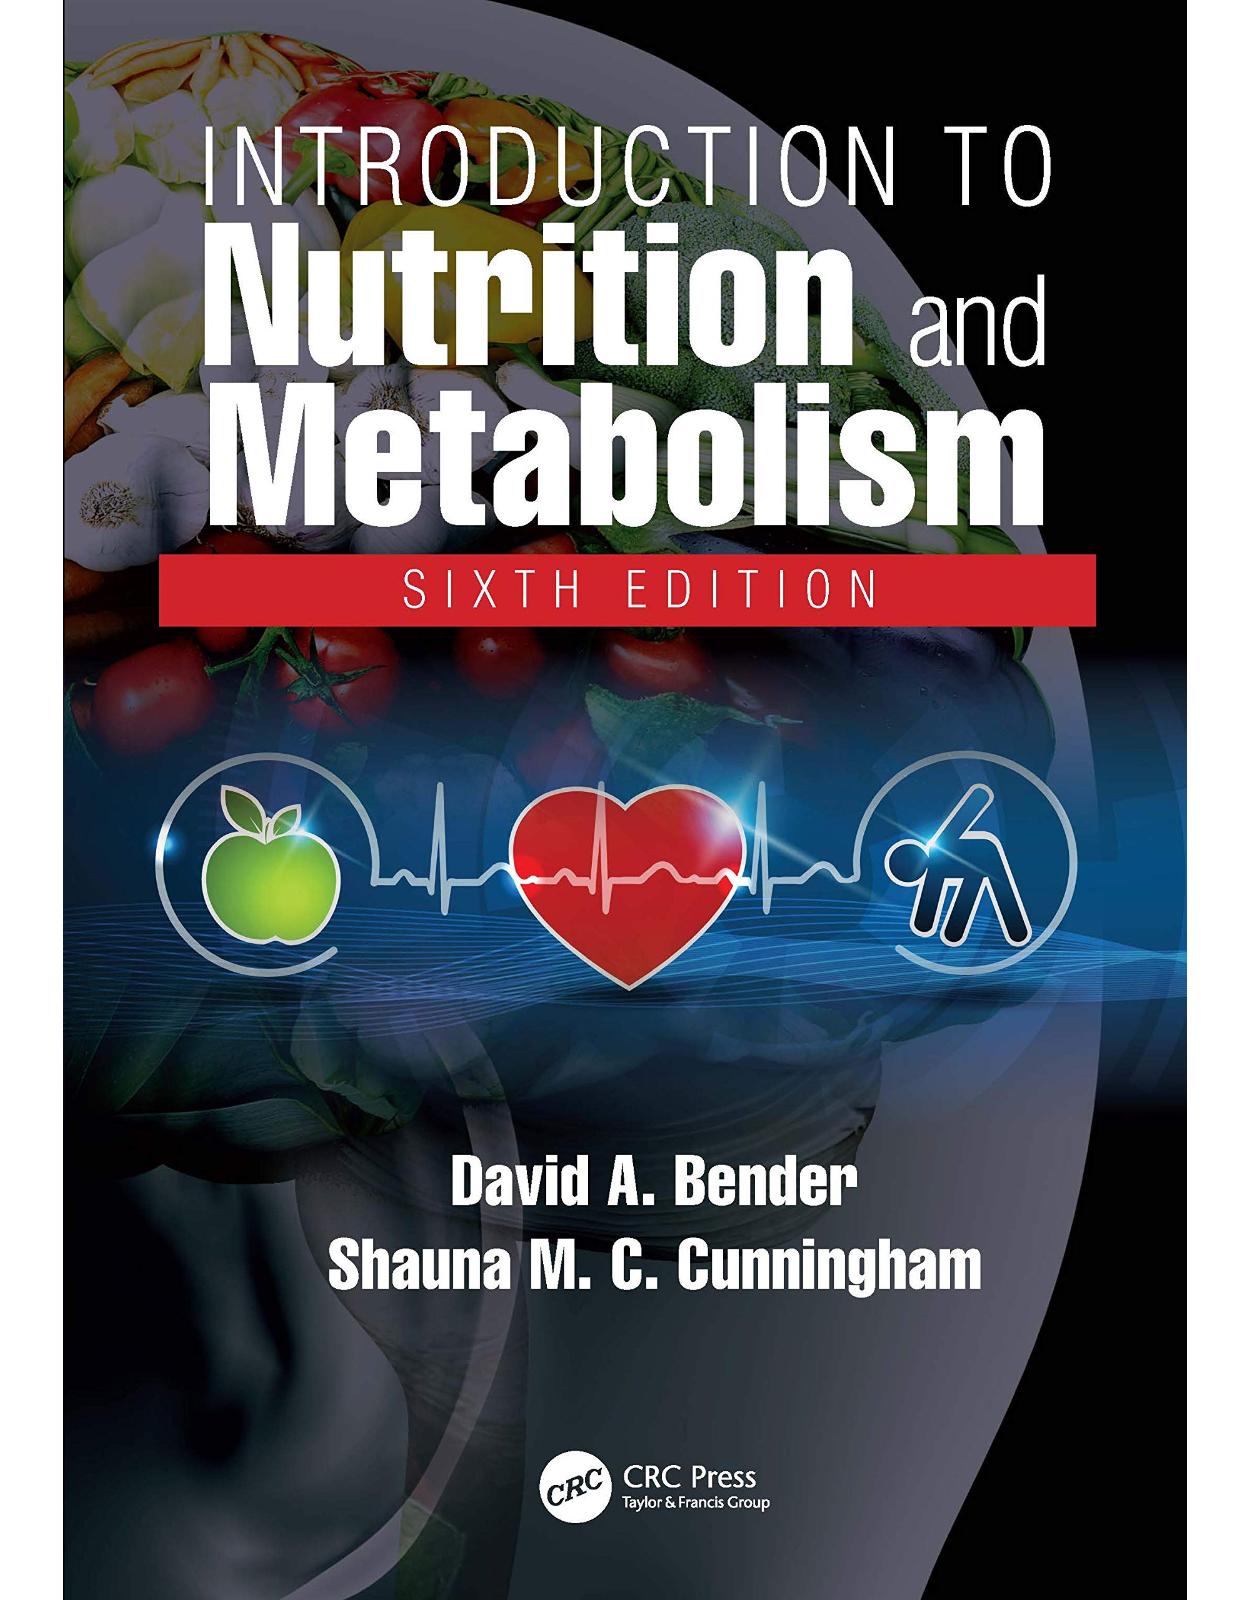 Introduction to Nutrition and Metabolism 